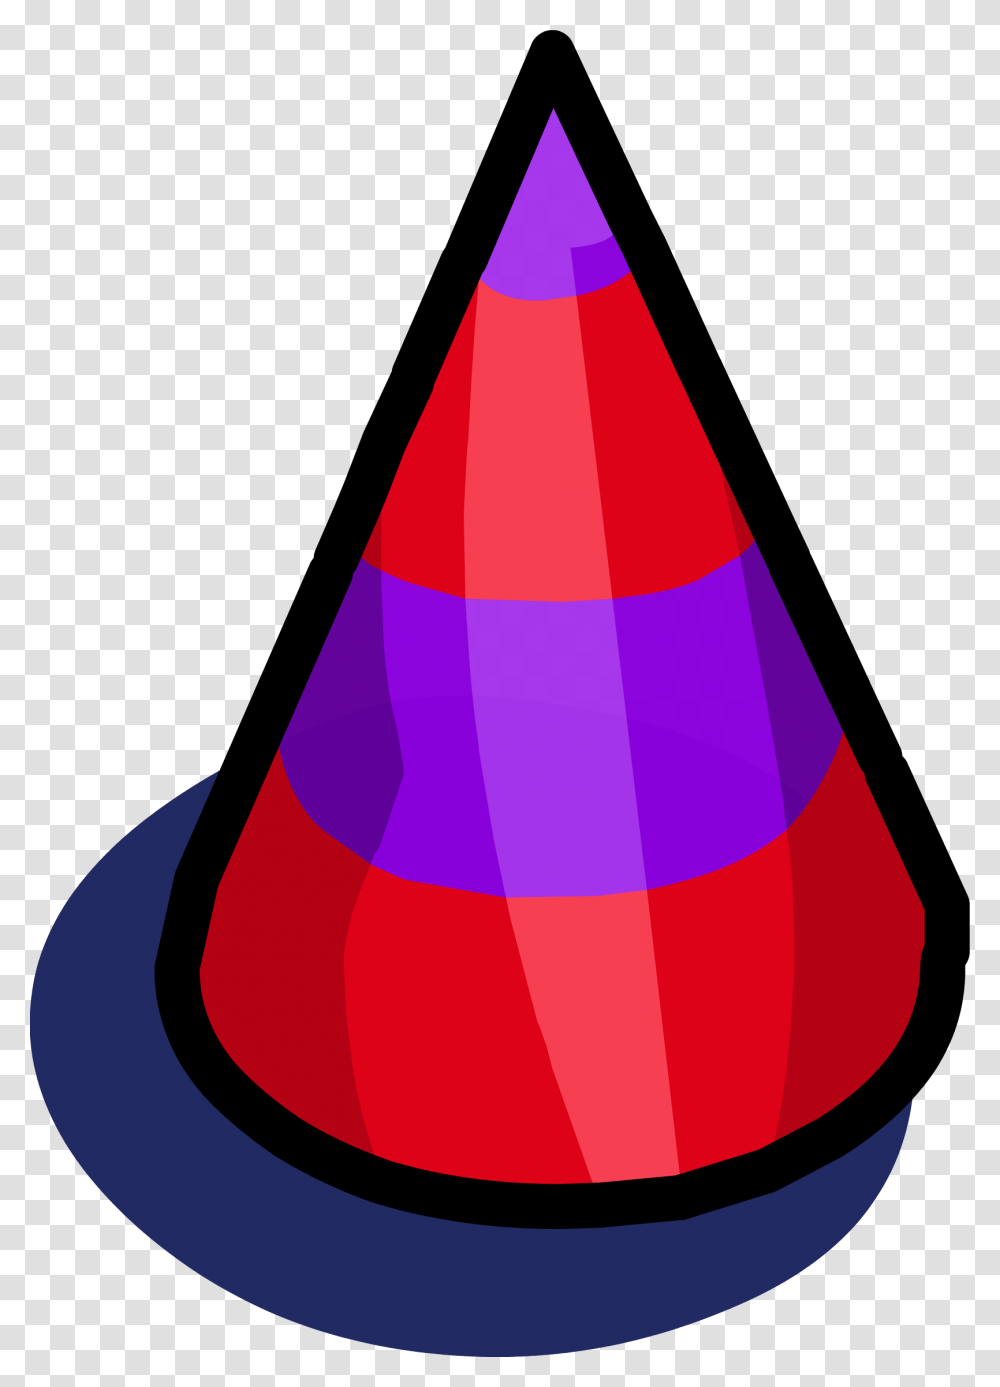 9th Anniversary Hat Cp Times Prohibido Fumar, Apparel, Party Hat, Cone Transparent Png